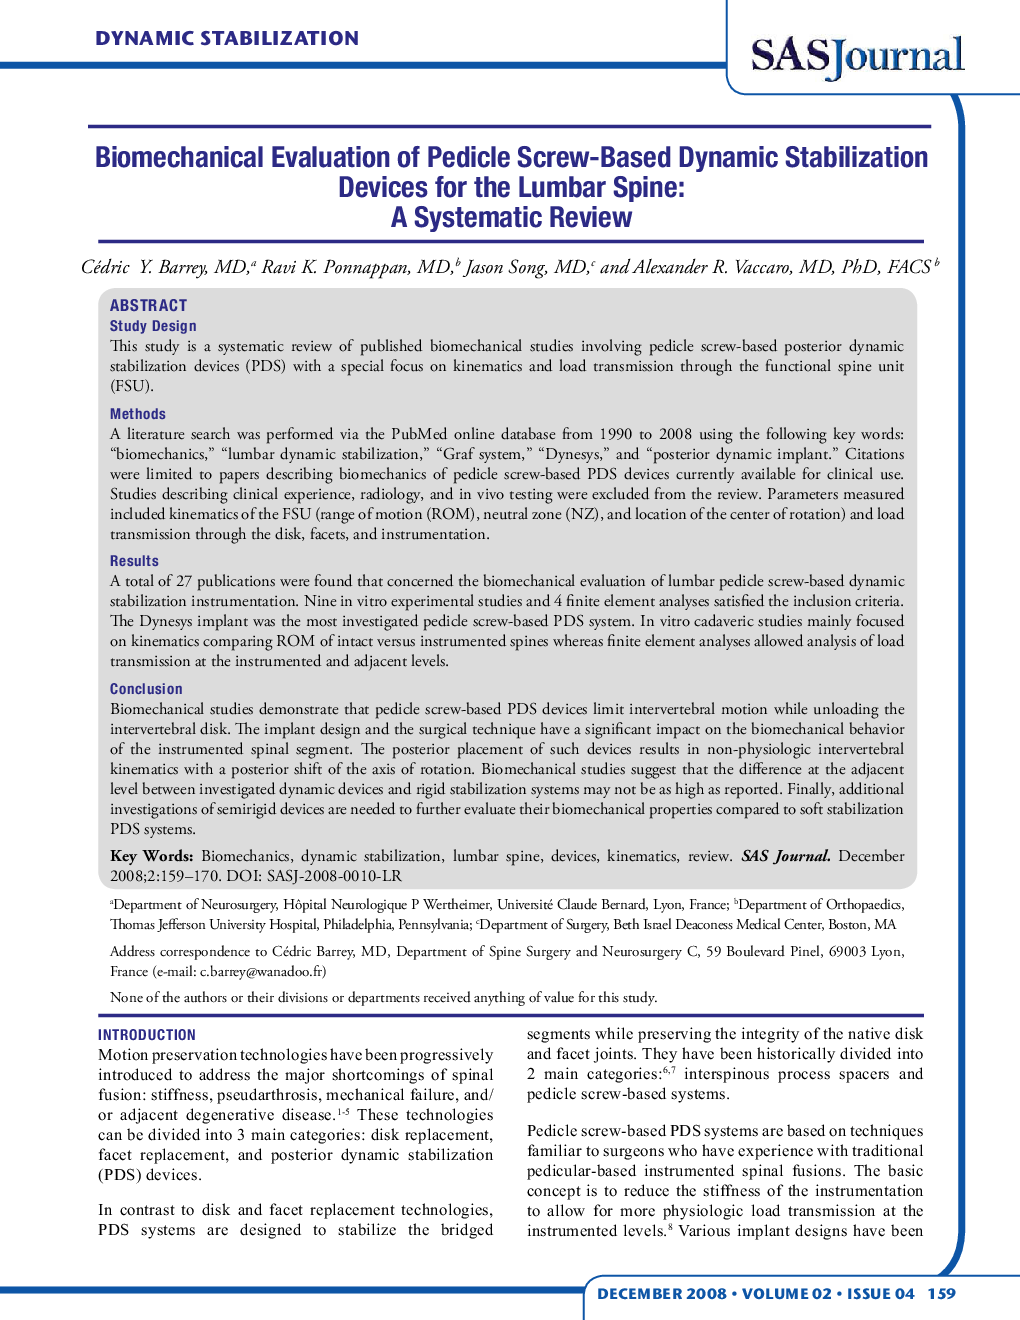 Biomechanical Evaluation of Pedicle Screw-Based Dynamic Stabilization Devices for the Lumbar Spine: A Systematic Review 